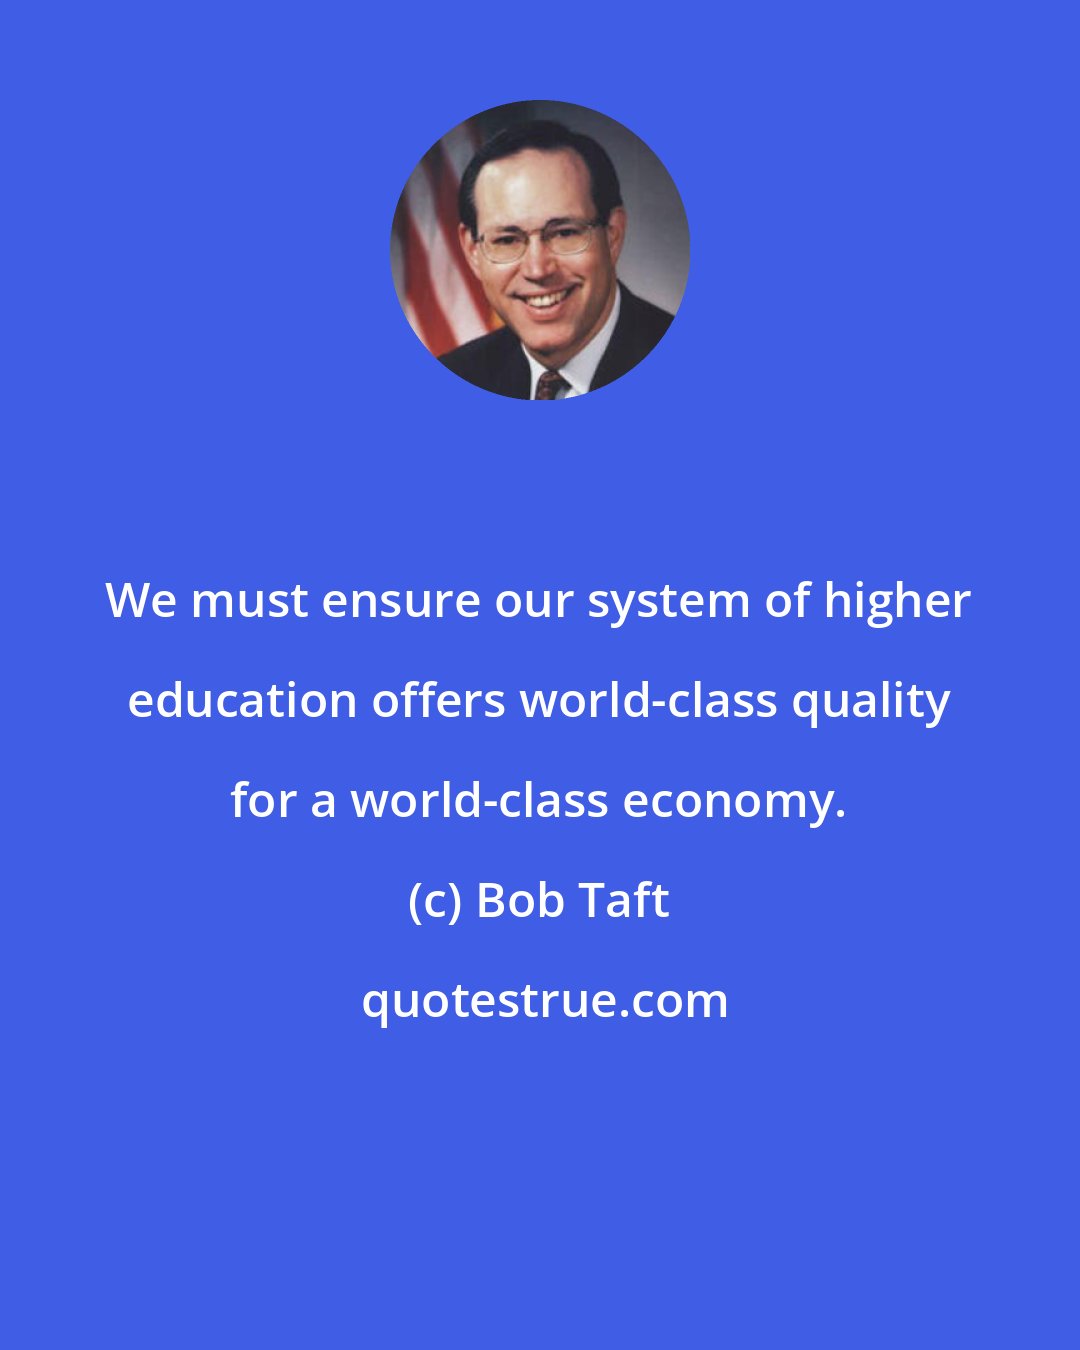 Bob Taft: We must ensure our system of higher education offers world-class quality for a world-class economy.